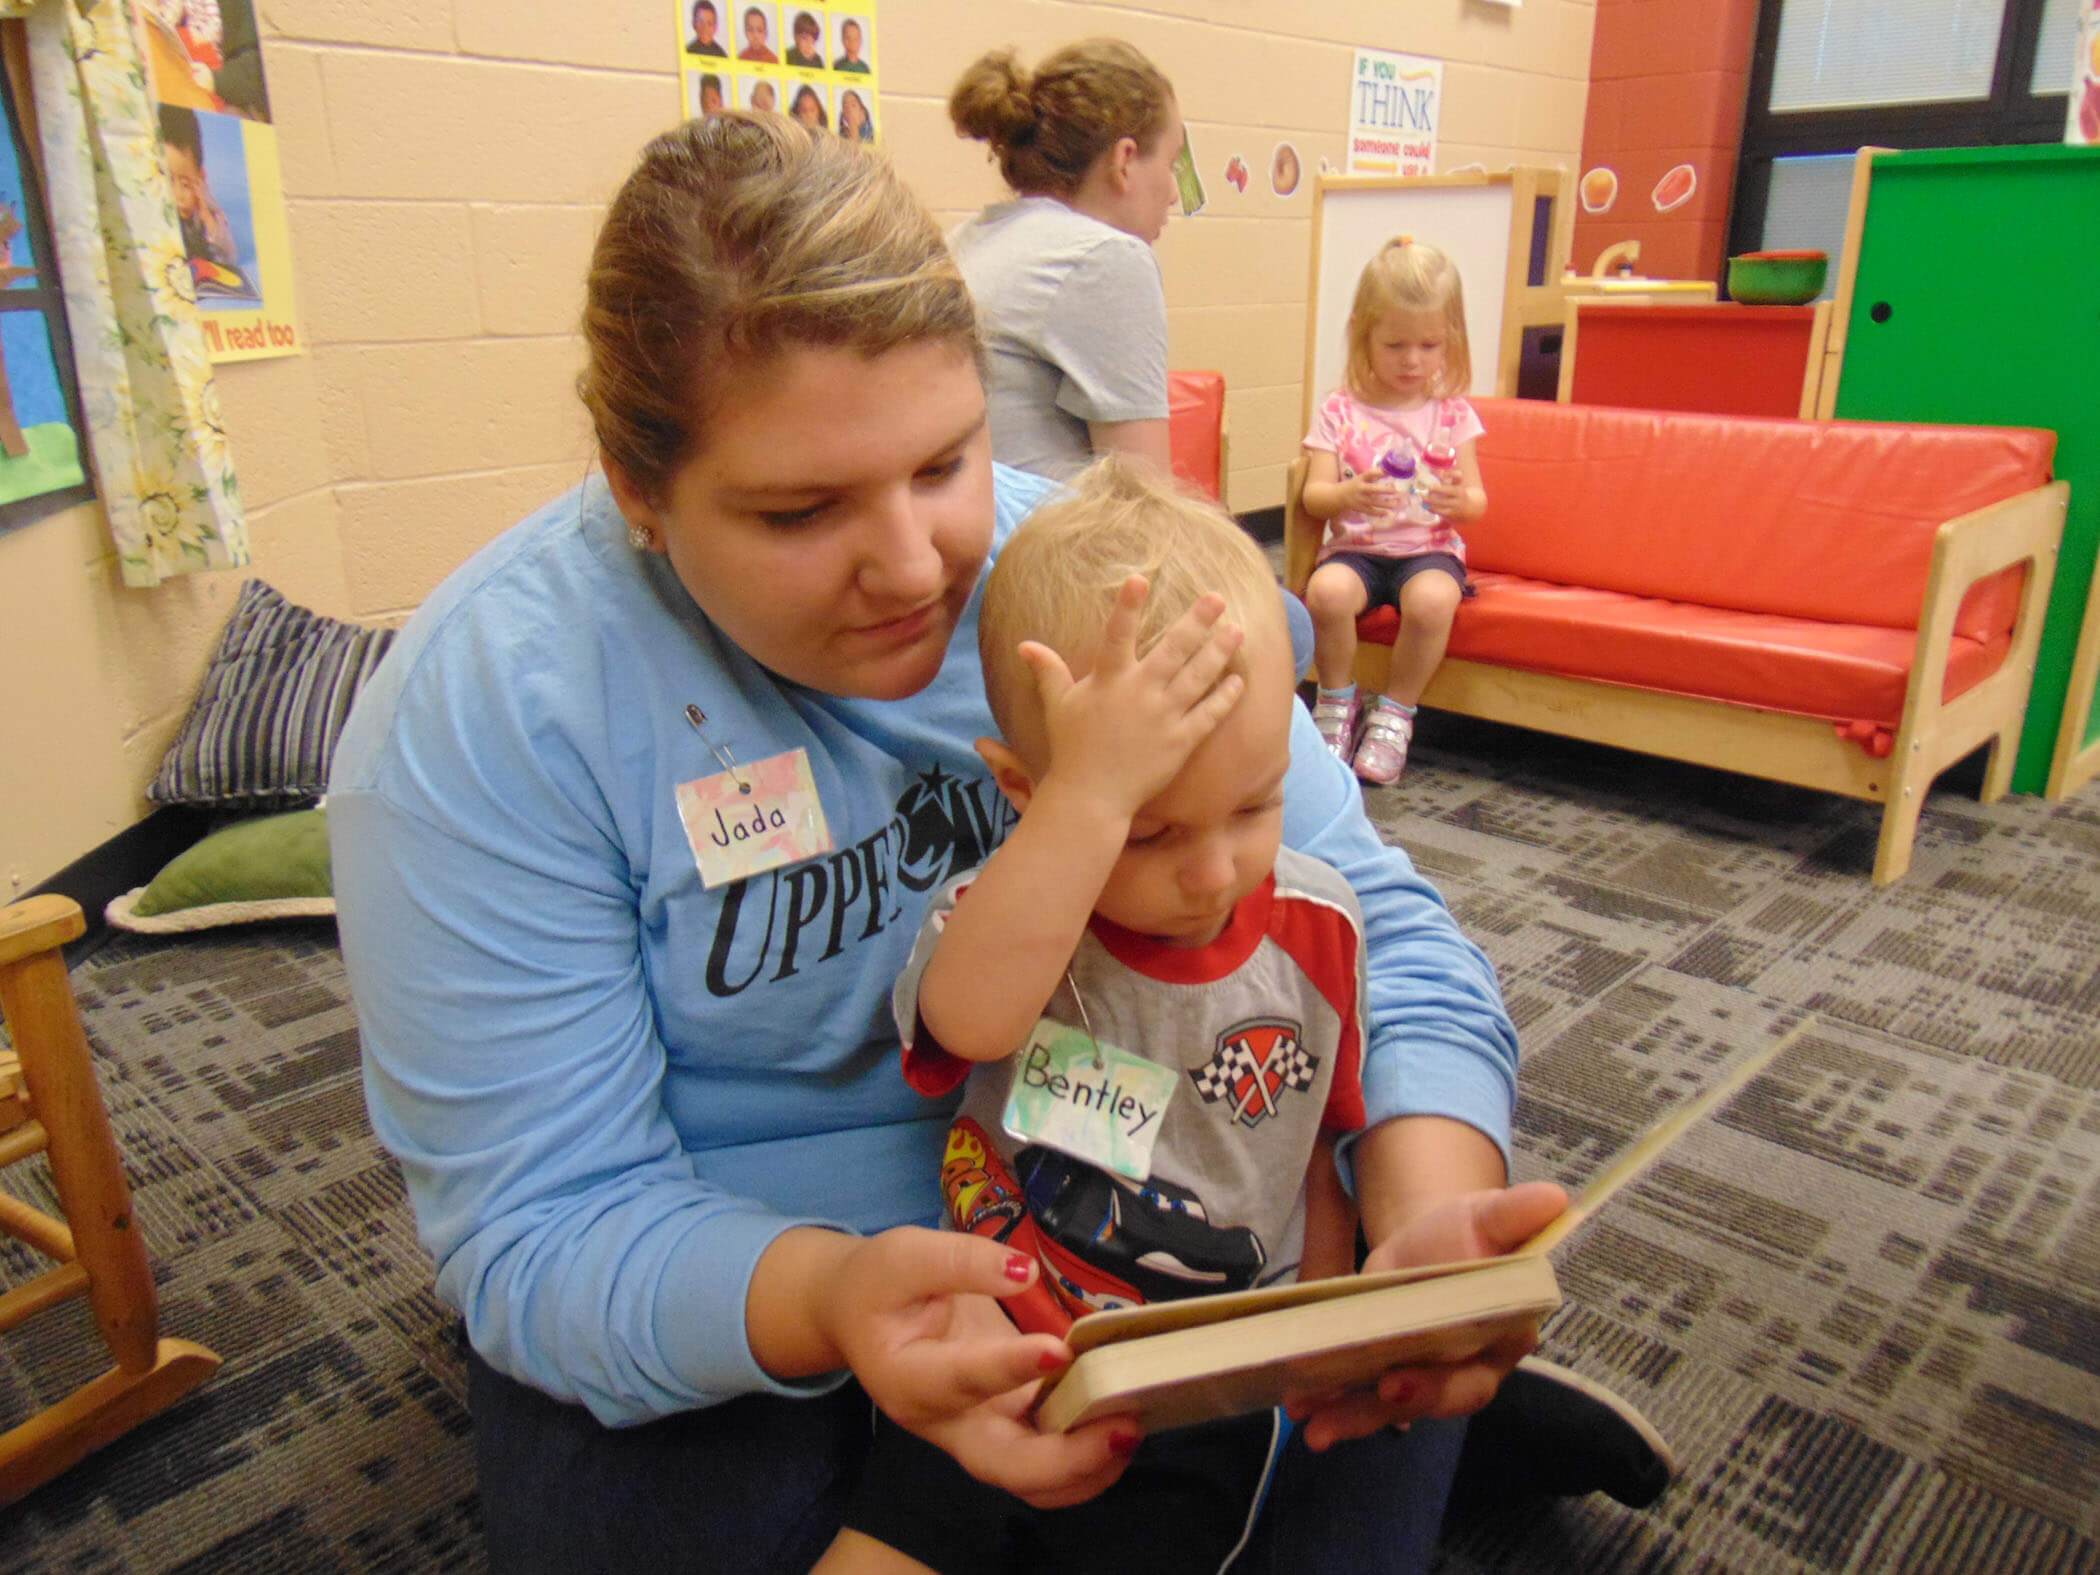 High School student teacher with young preschool student reading a book